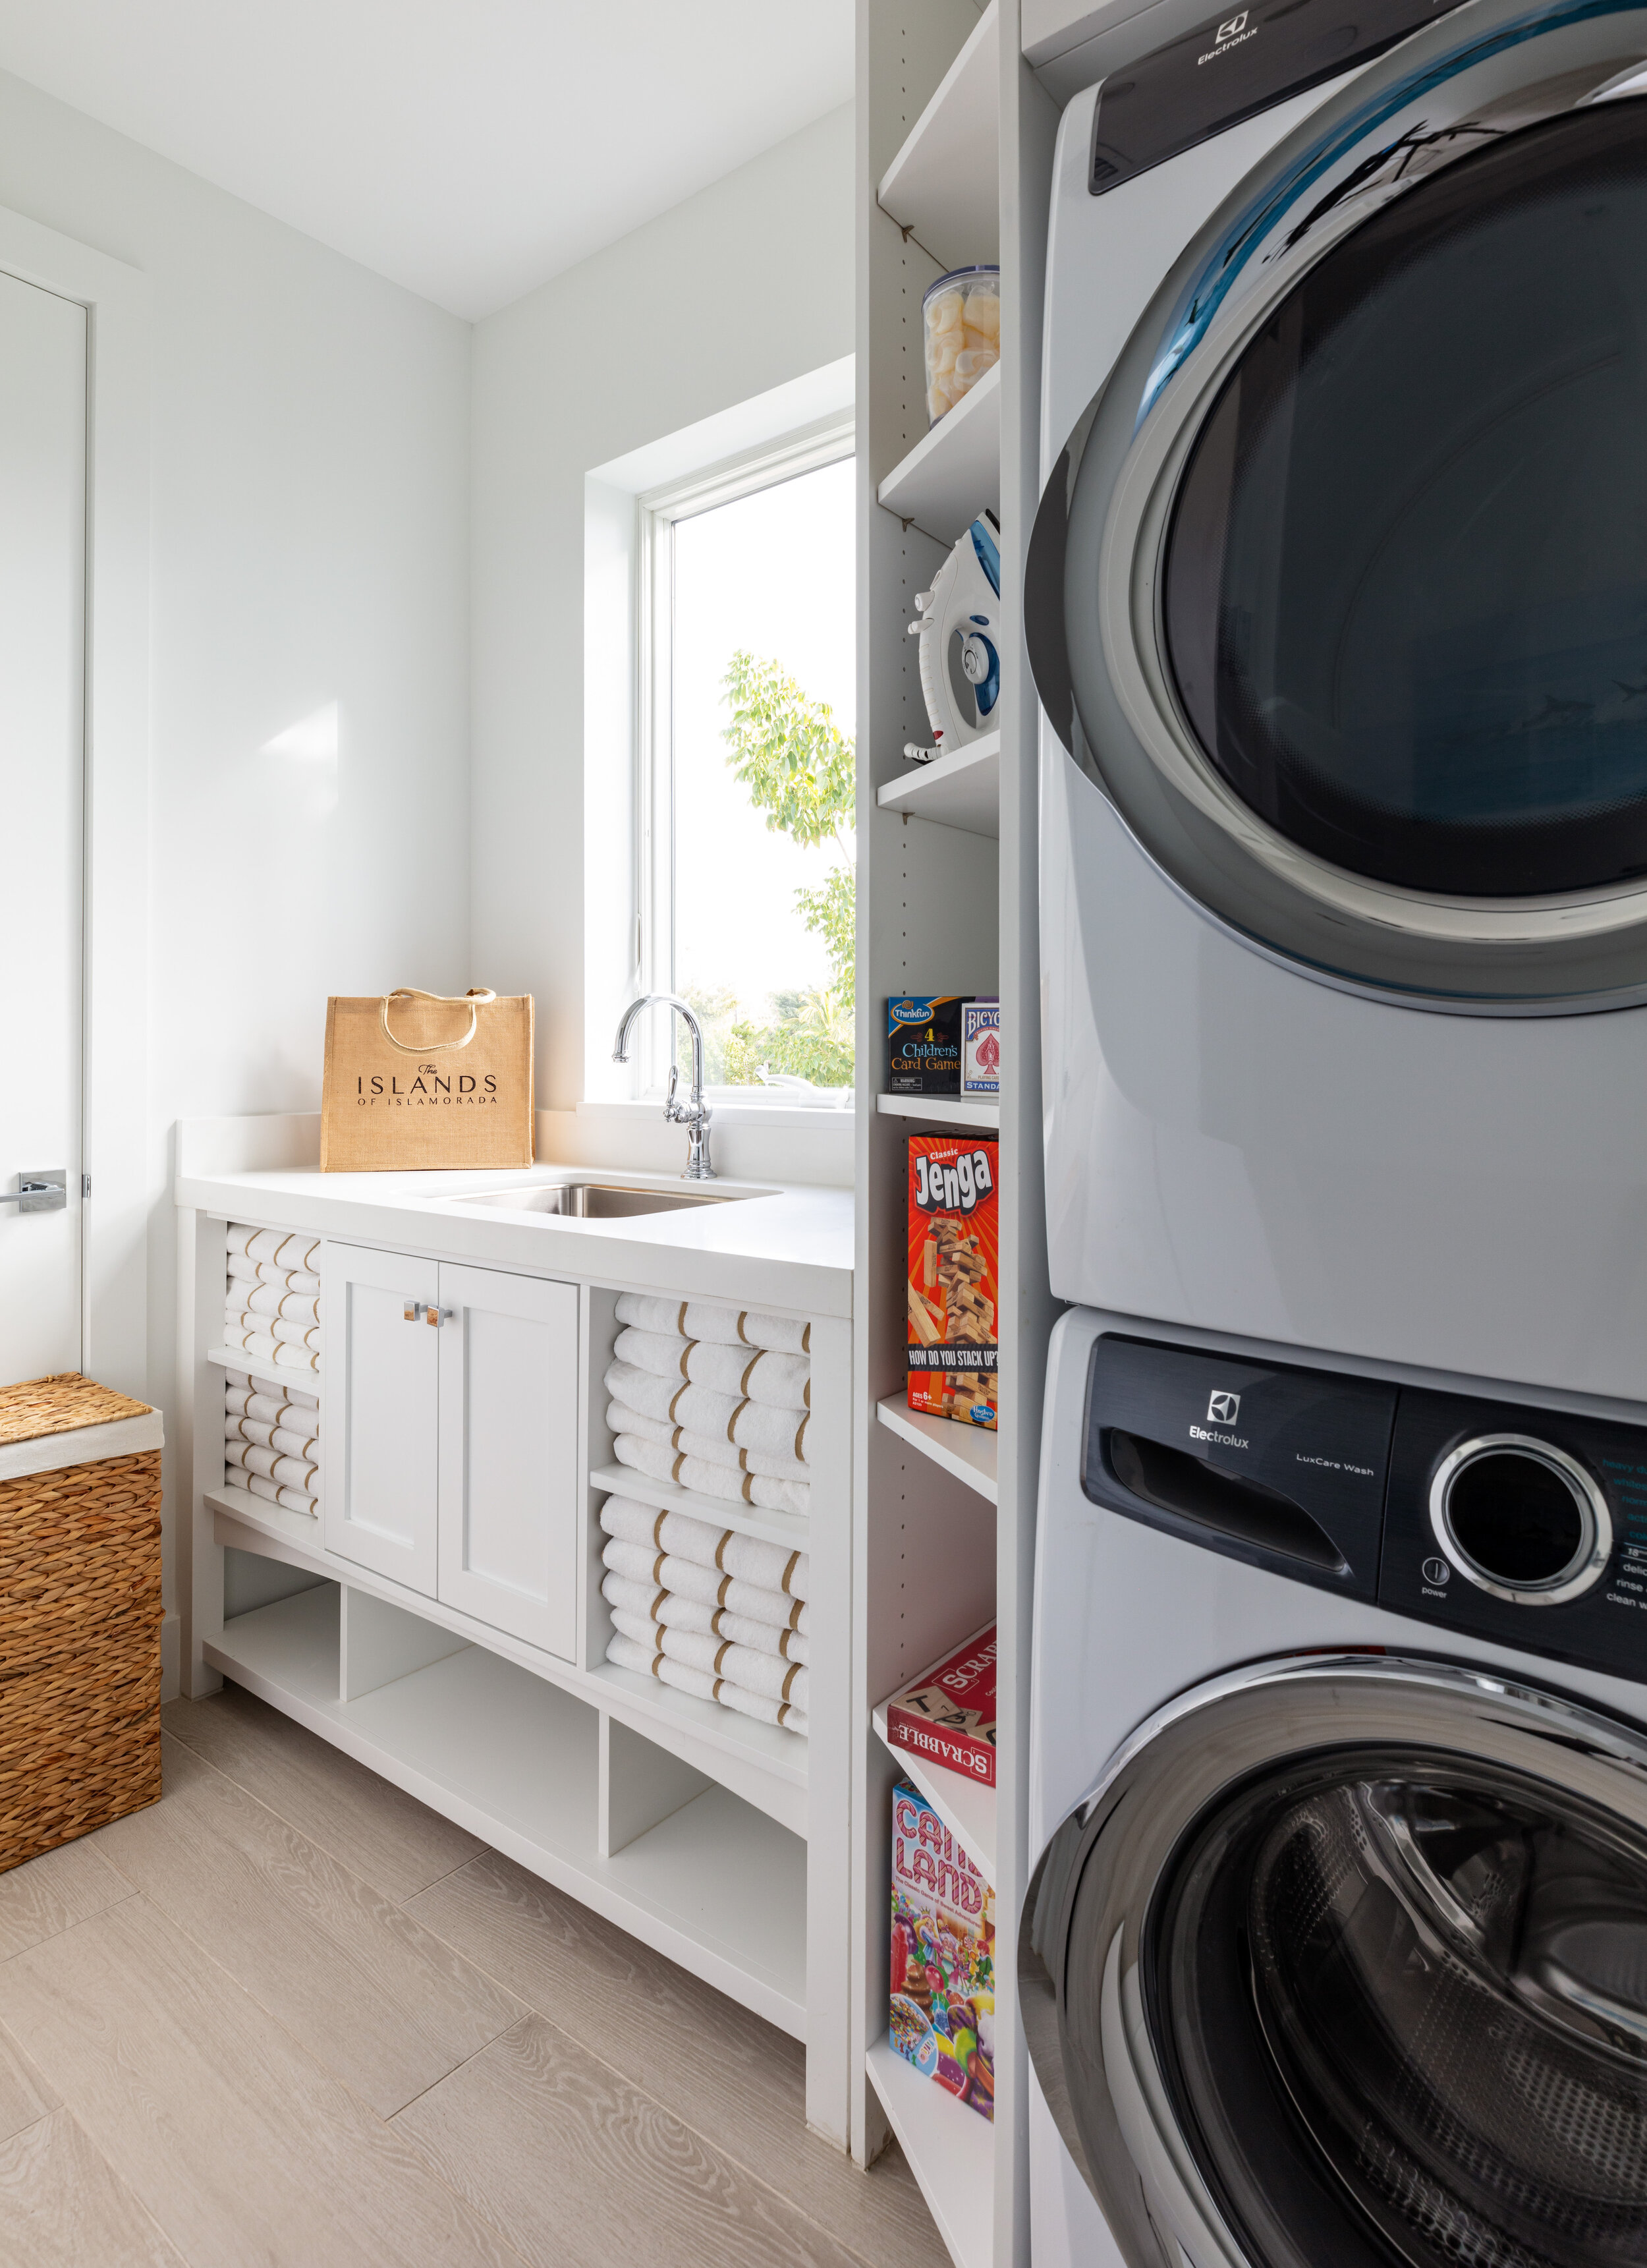  Laundry room in an Islands waterfront villa with washer, drier, and towel cabinet. 